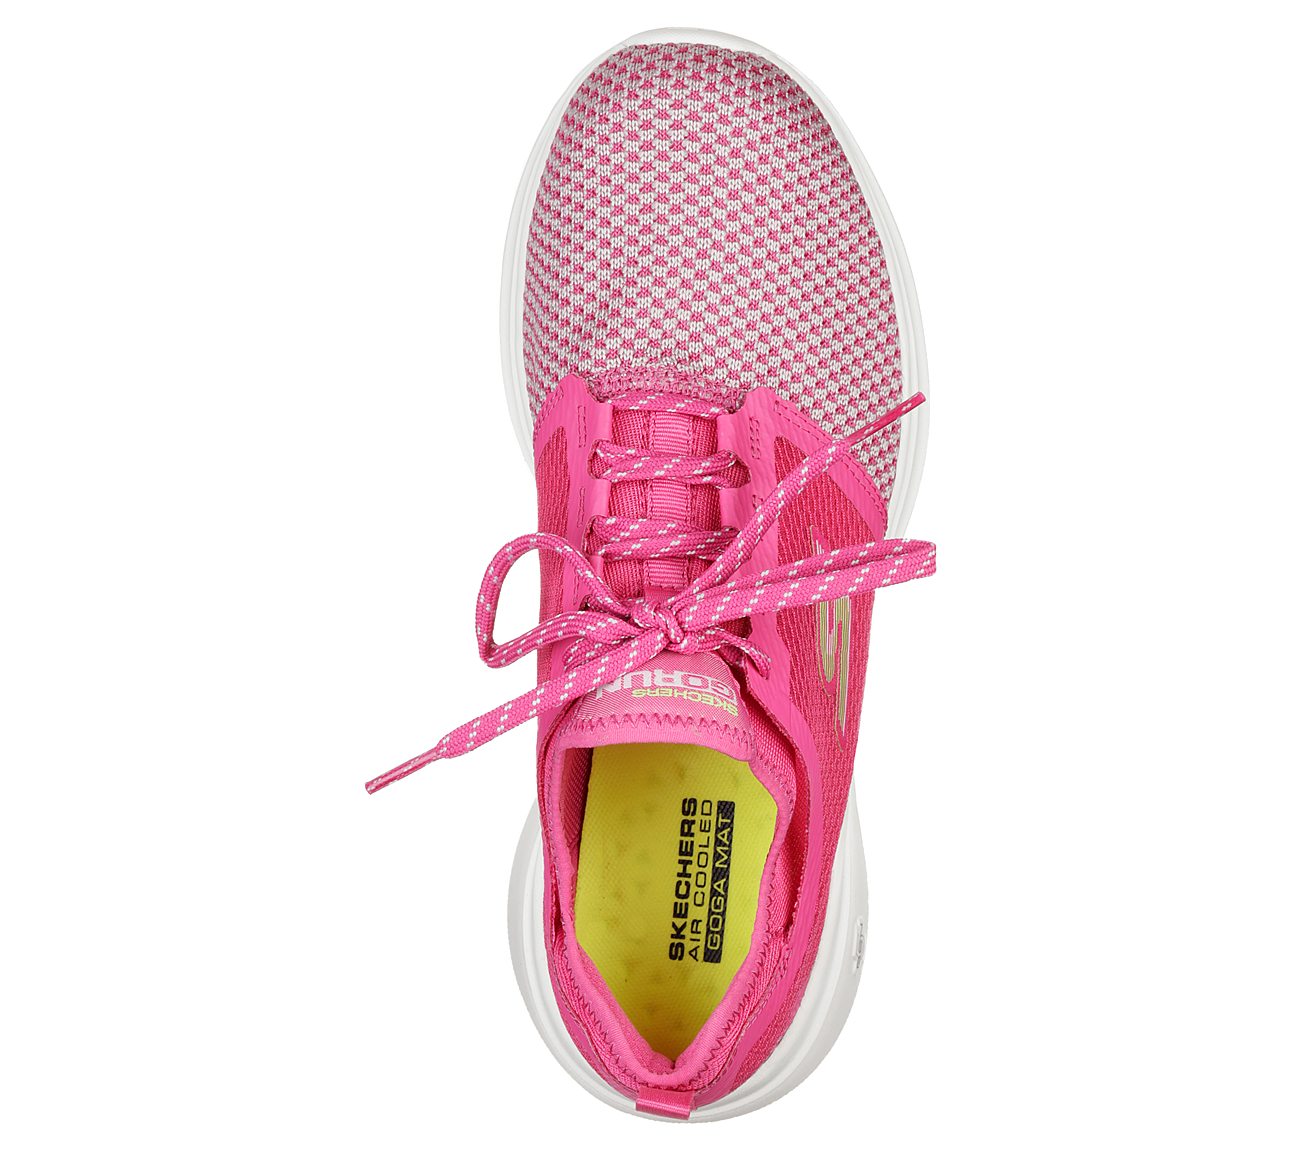 GO RUN FAST-INVIGORATE, HOT PINK/LIME Footwear Top View